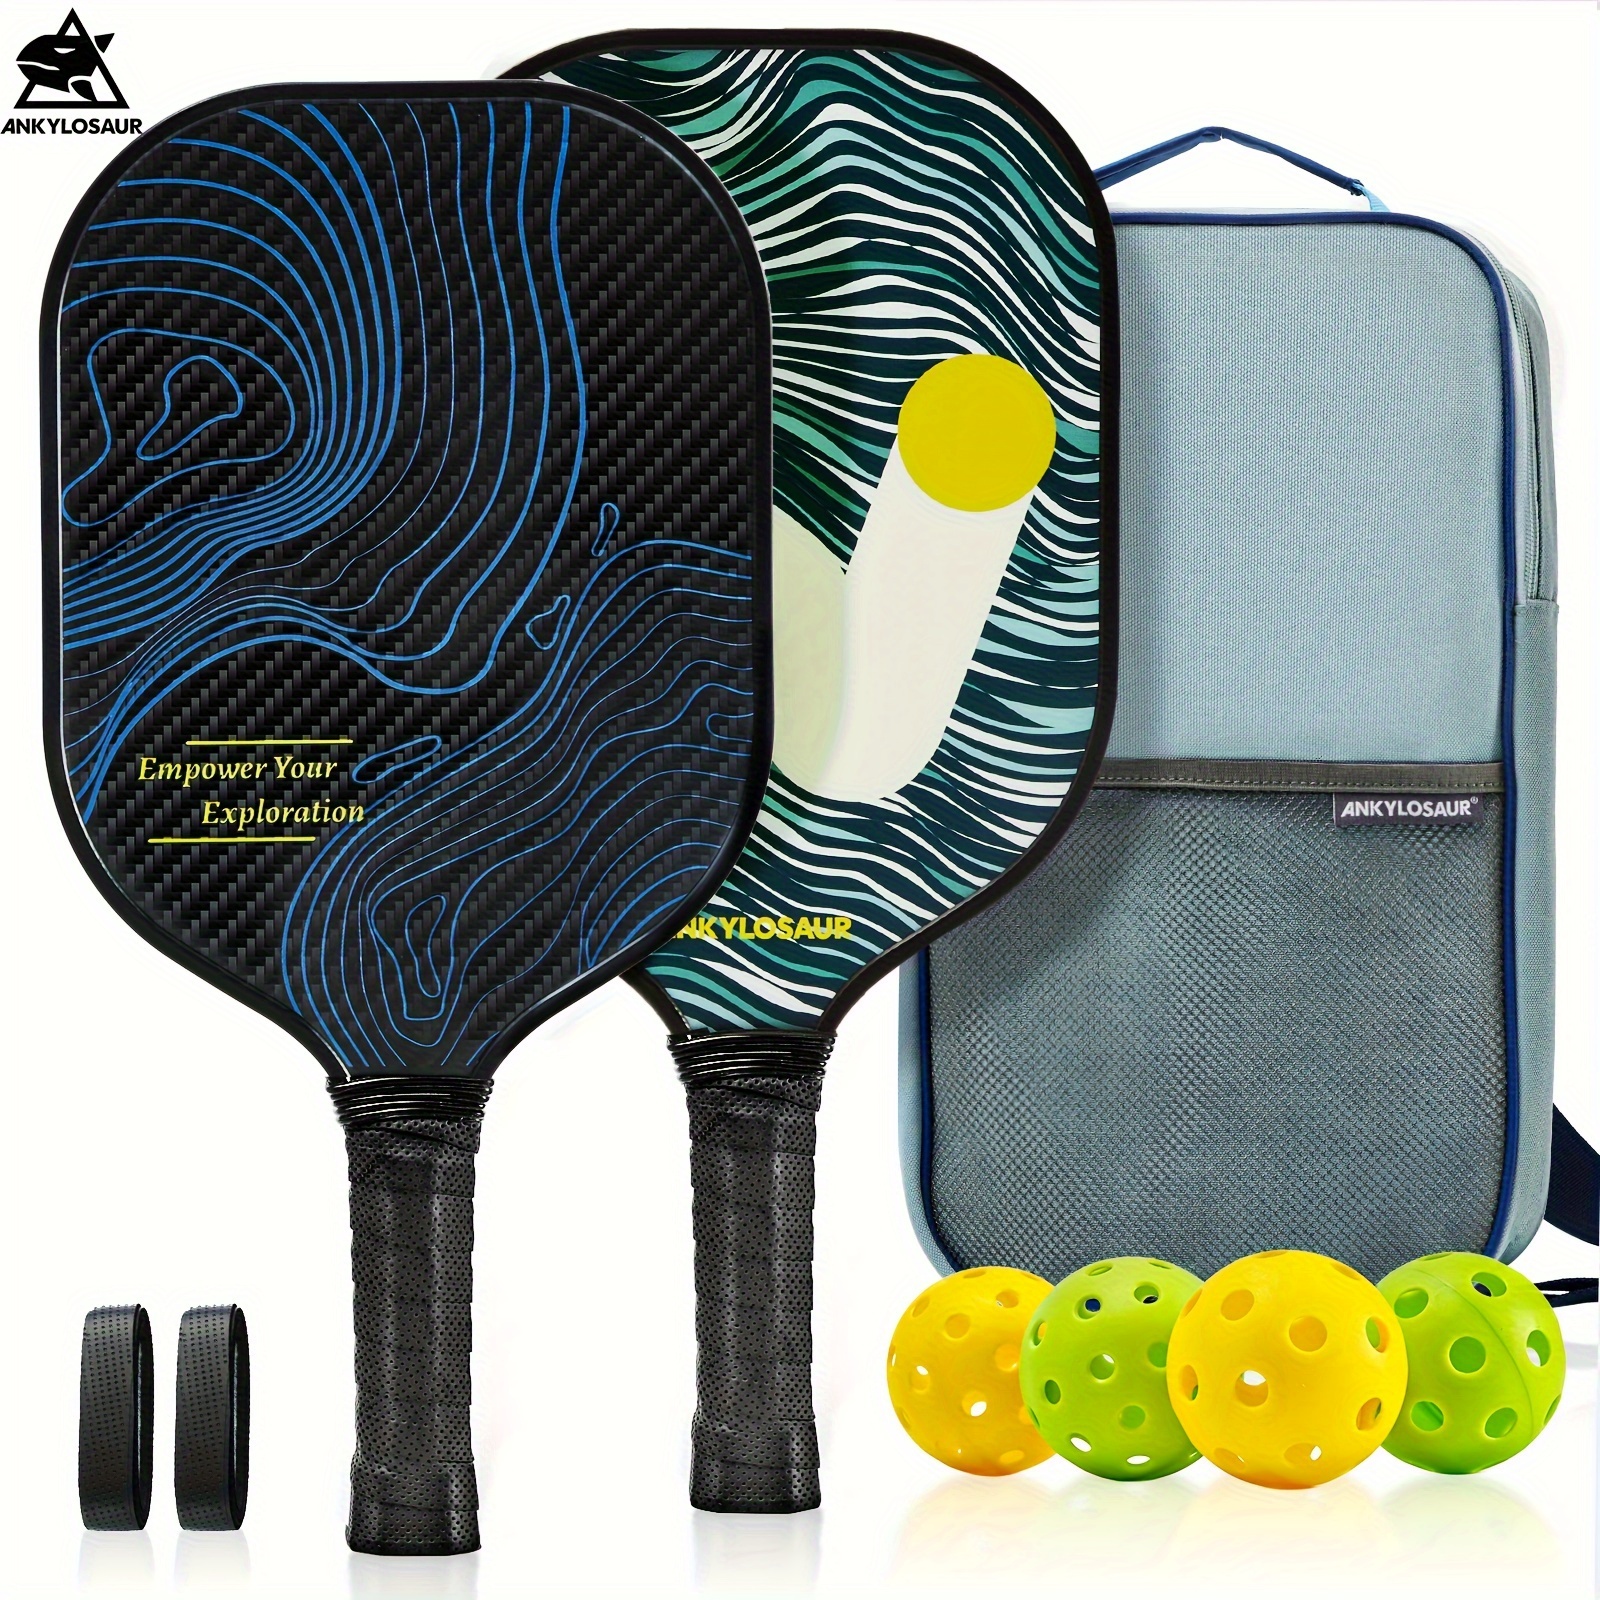 

2pcs/set Pickleball Paddles With Advanced 3k Carbon Surface, Includes 1 Portable Carry Bag, 2 High-performance Grip Tapes, And 4 Pickleballs